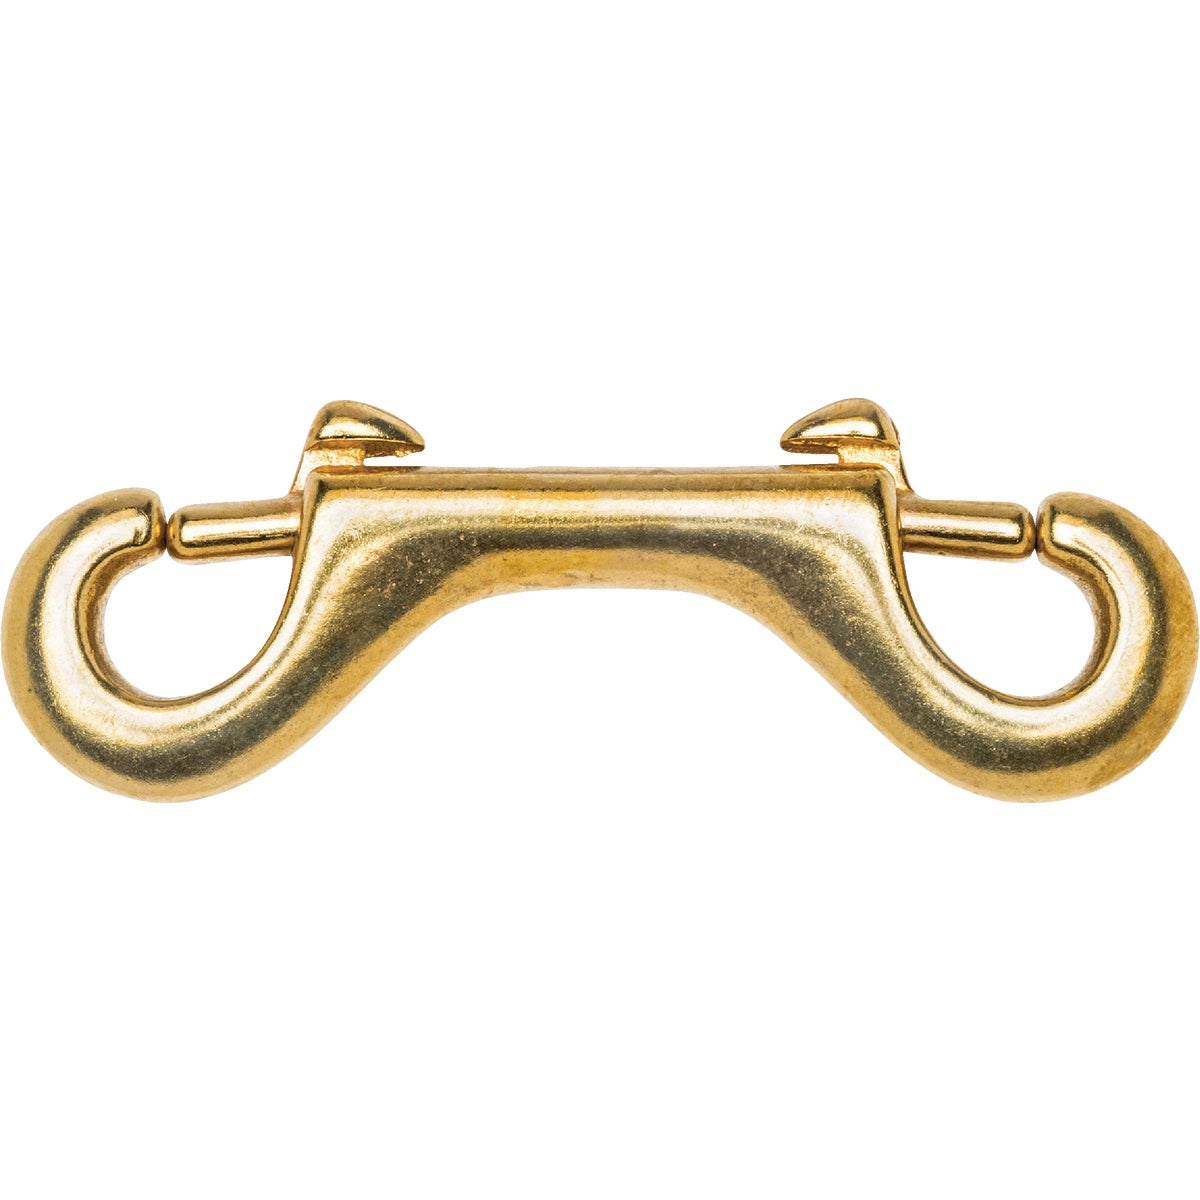 Item 746143, Double pattern chain bolt snap. Features a double ended pattern.